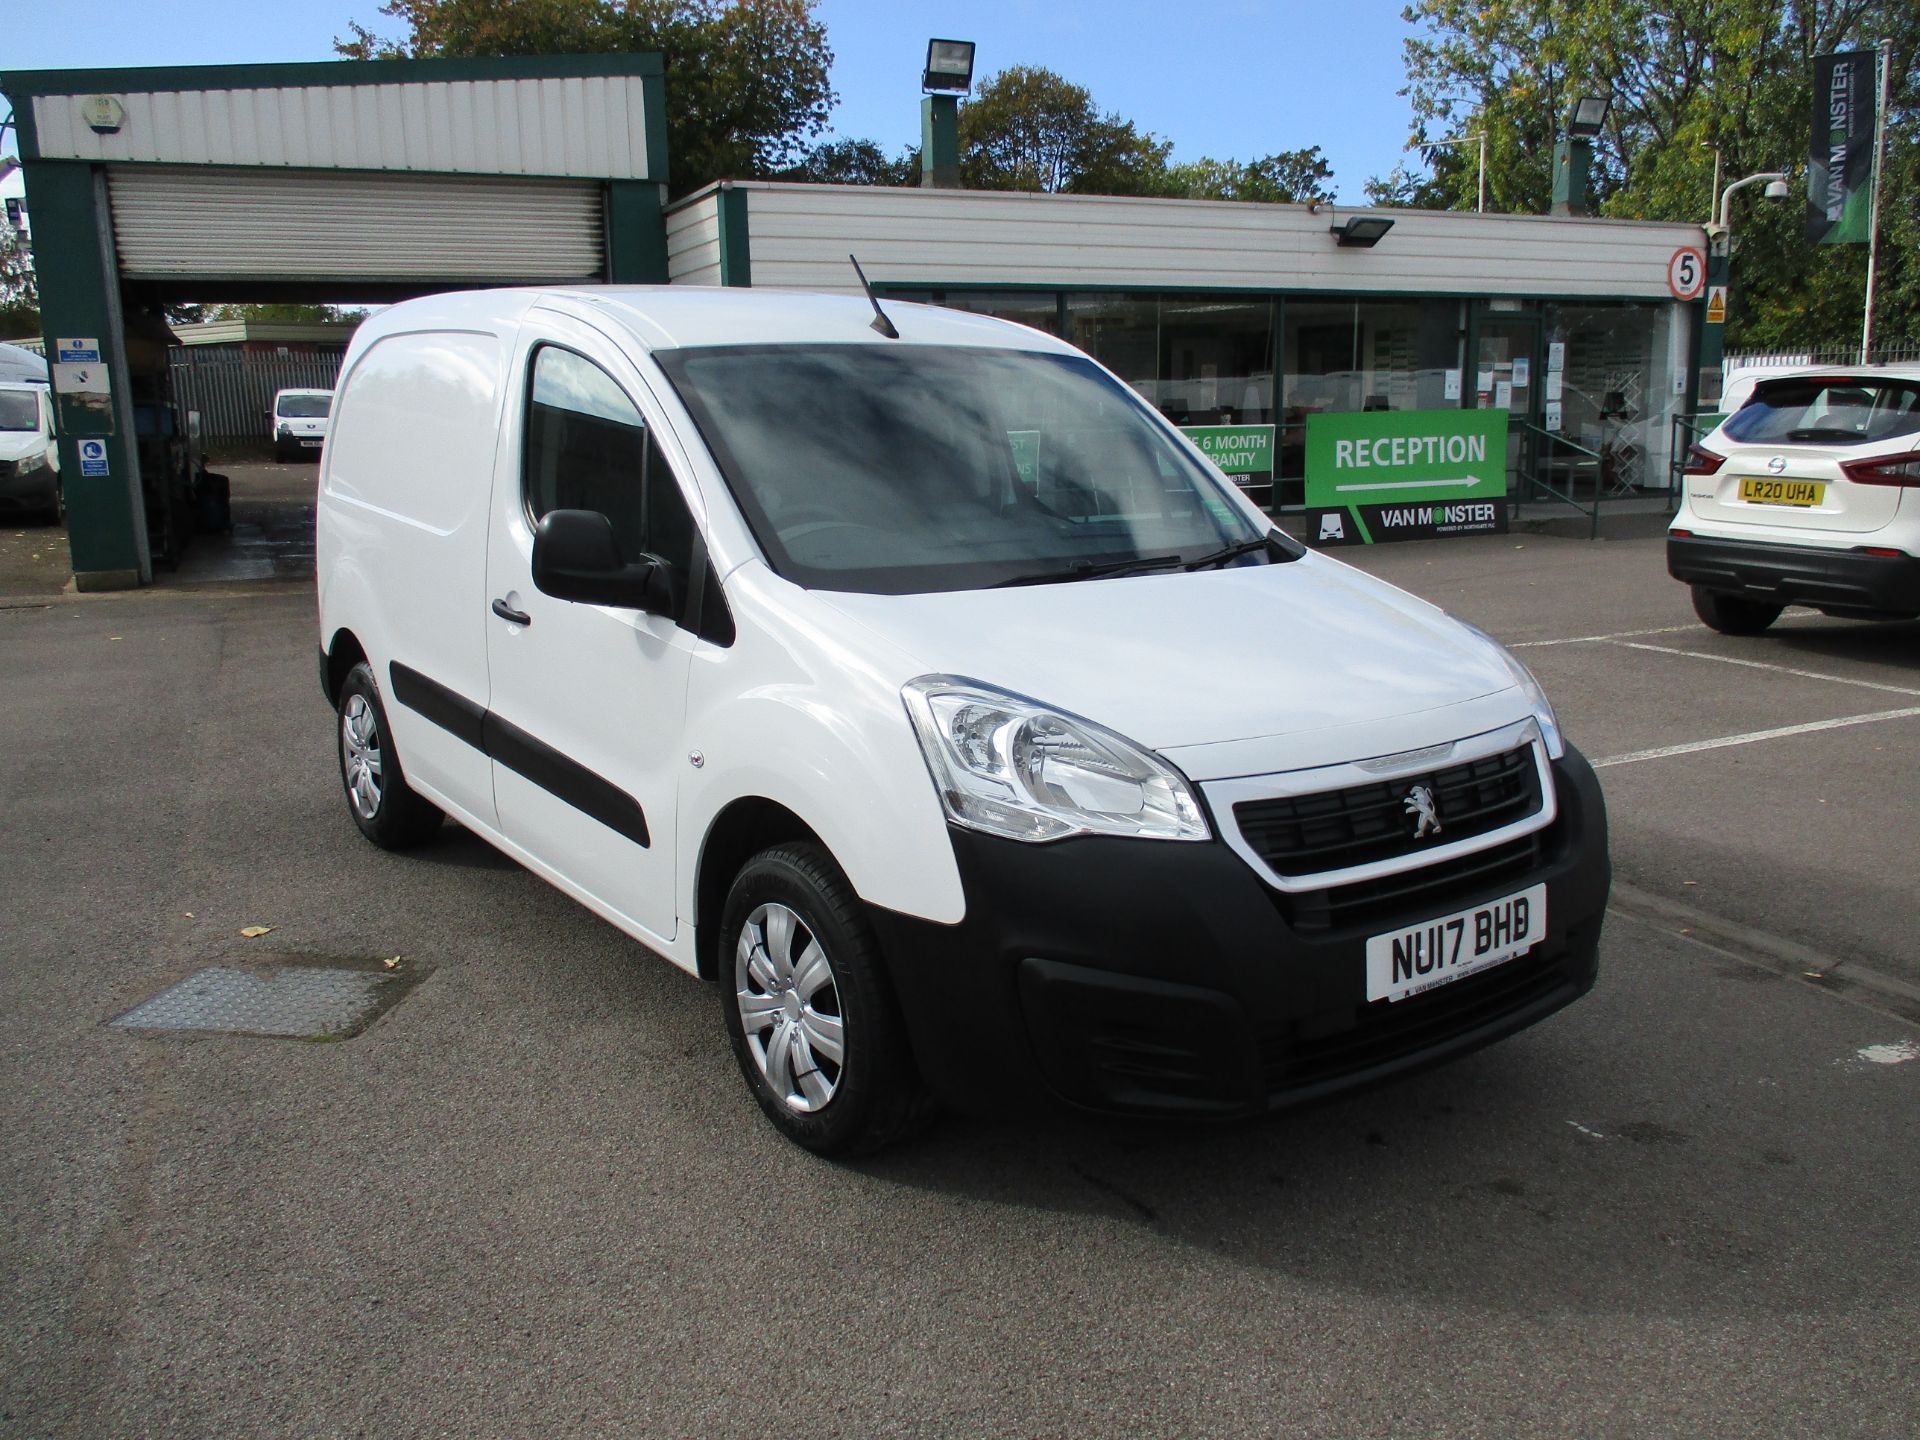 used vans leicestershire